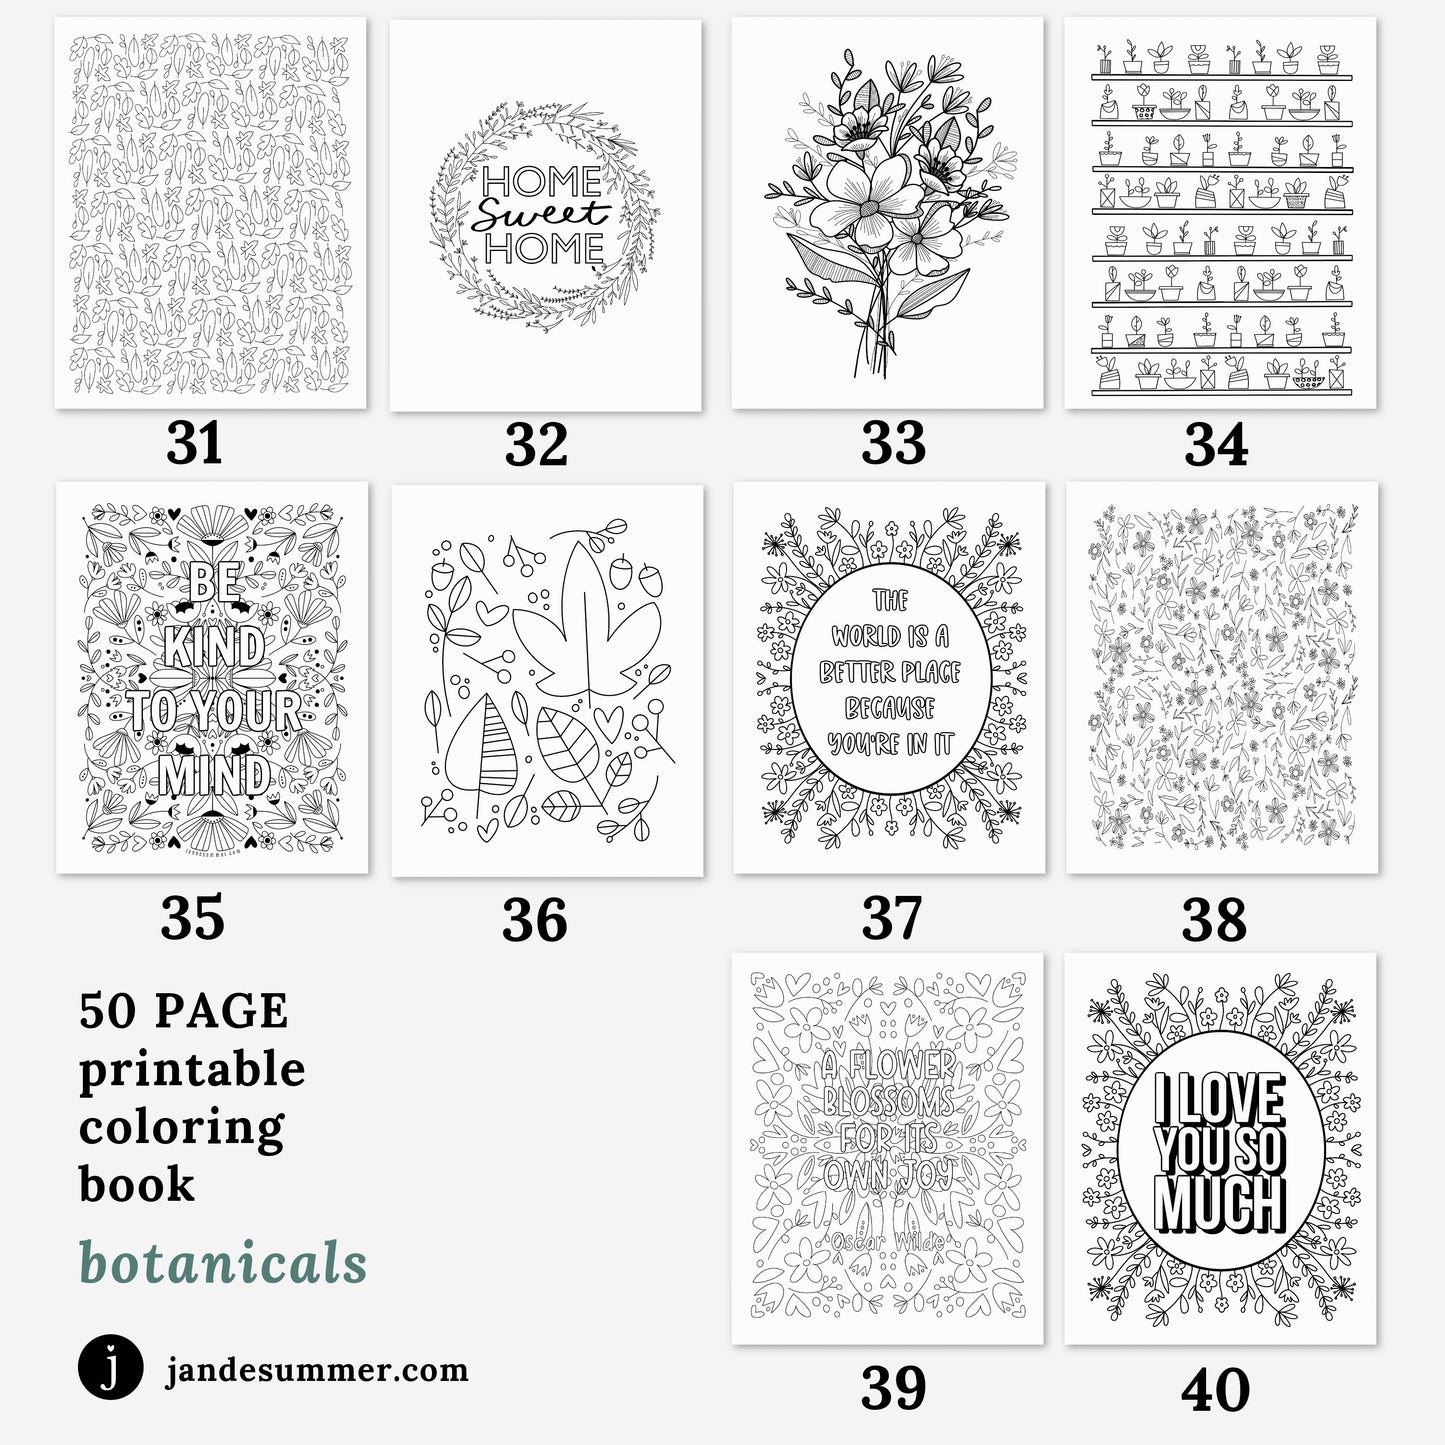 50 Coloring Pages | Botanical Digital Coloring Book Floral Illustrations | Zen Printable Coloring Pages